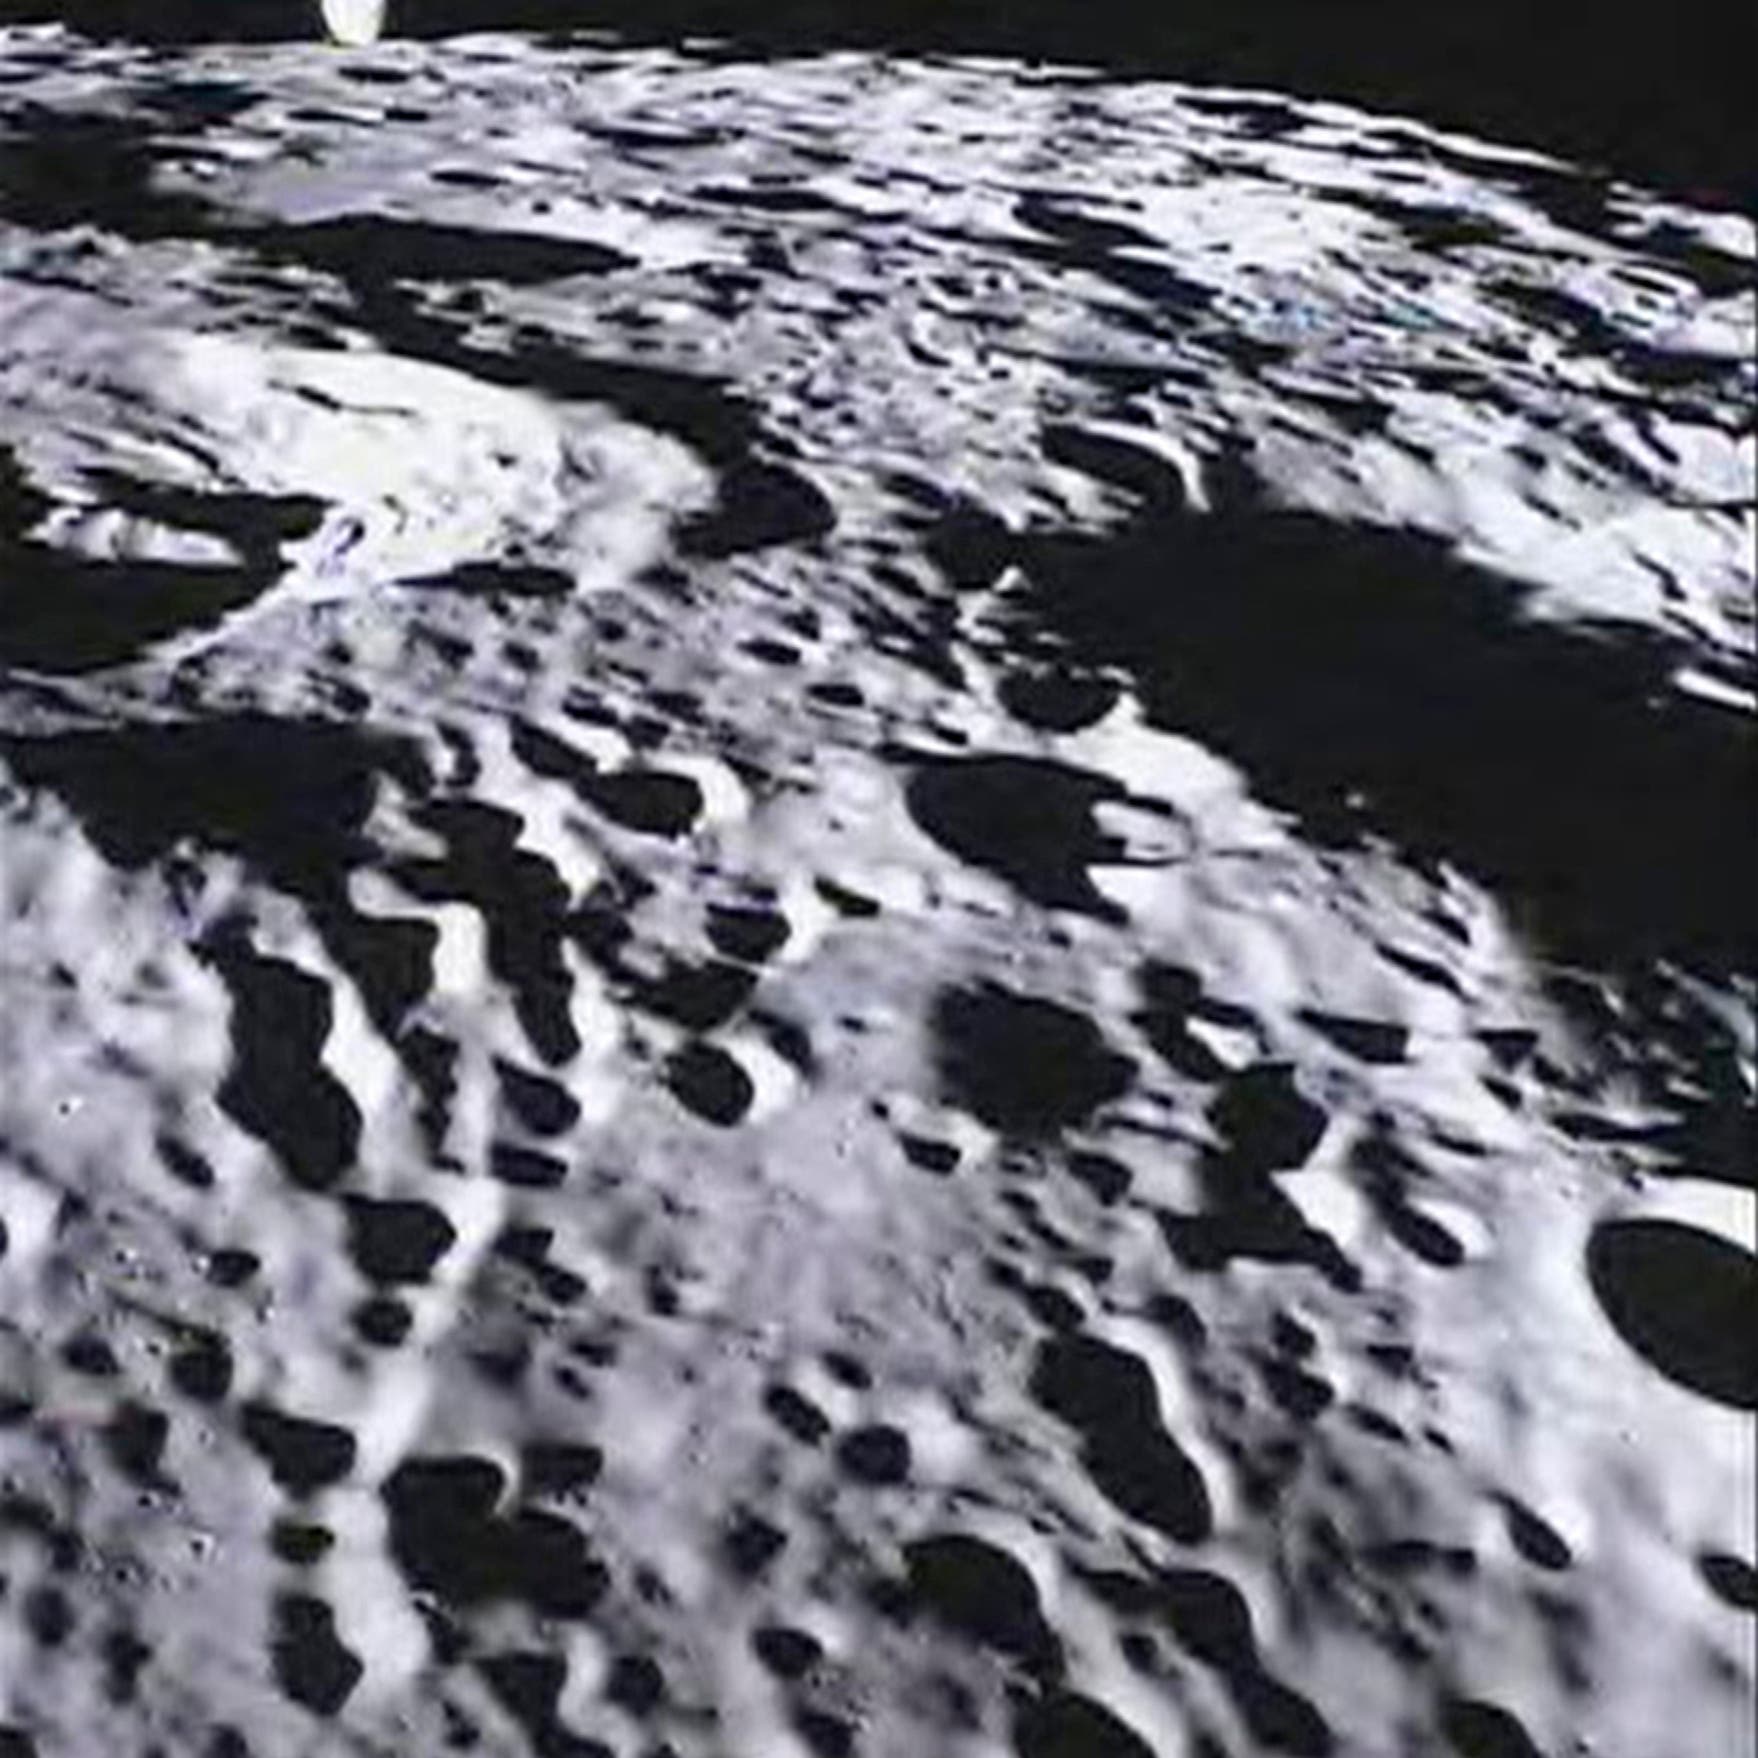 Ancient volcanoes on the Moon may have created drinking water, study finds